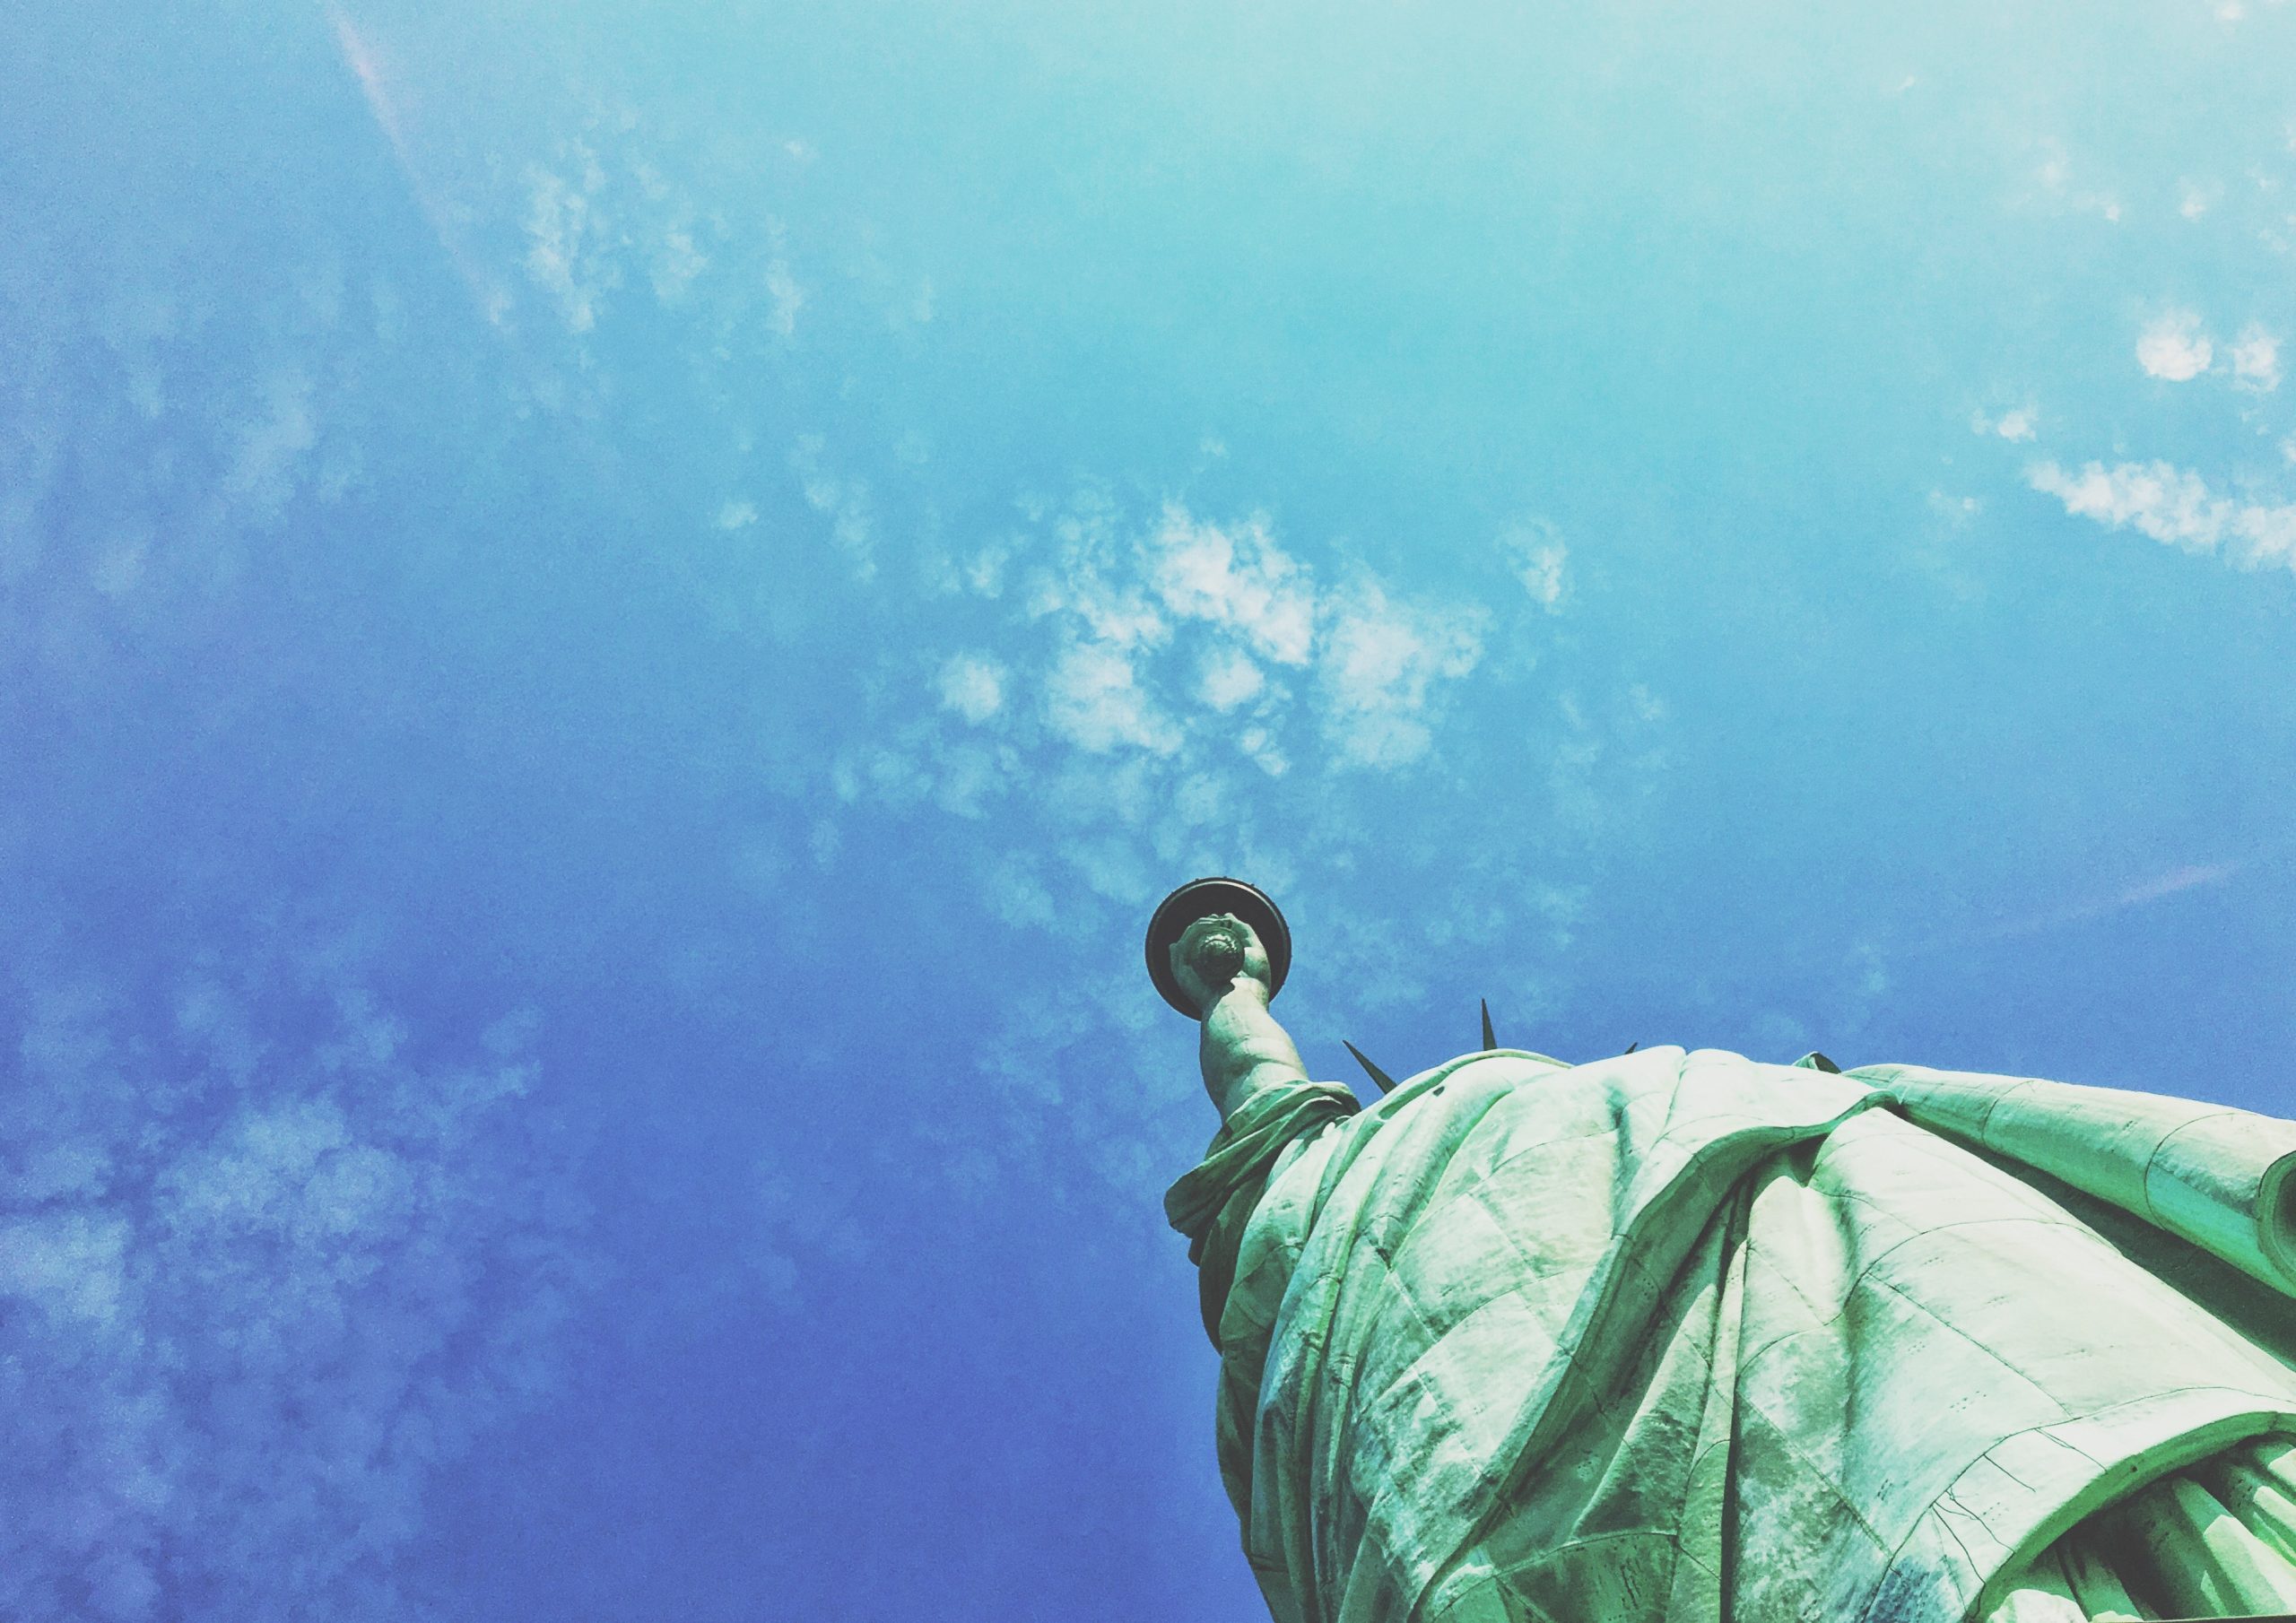 A view looking up at the Statue of Liberty against blue sky